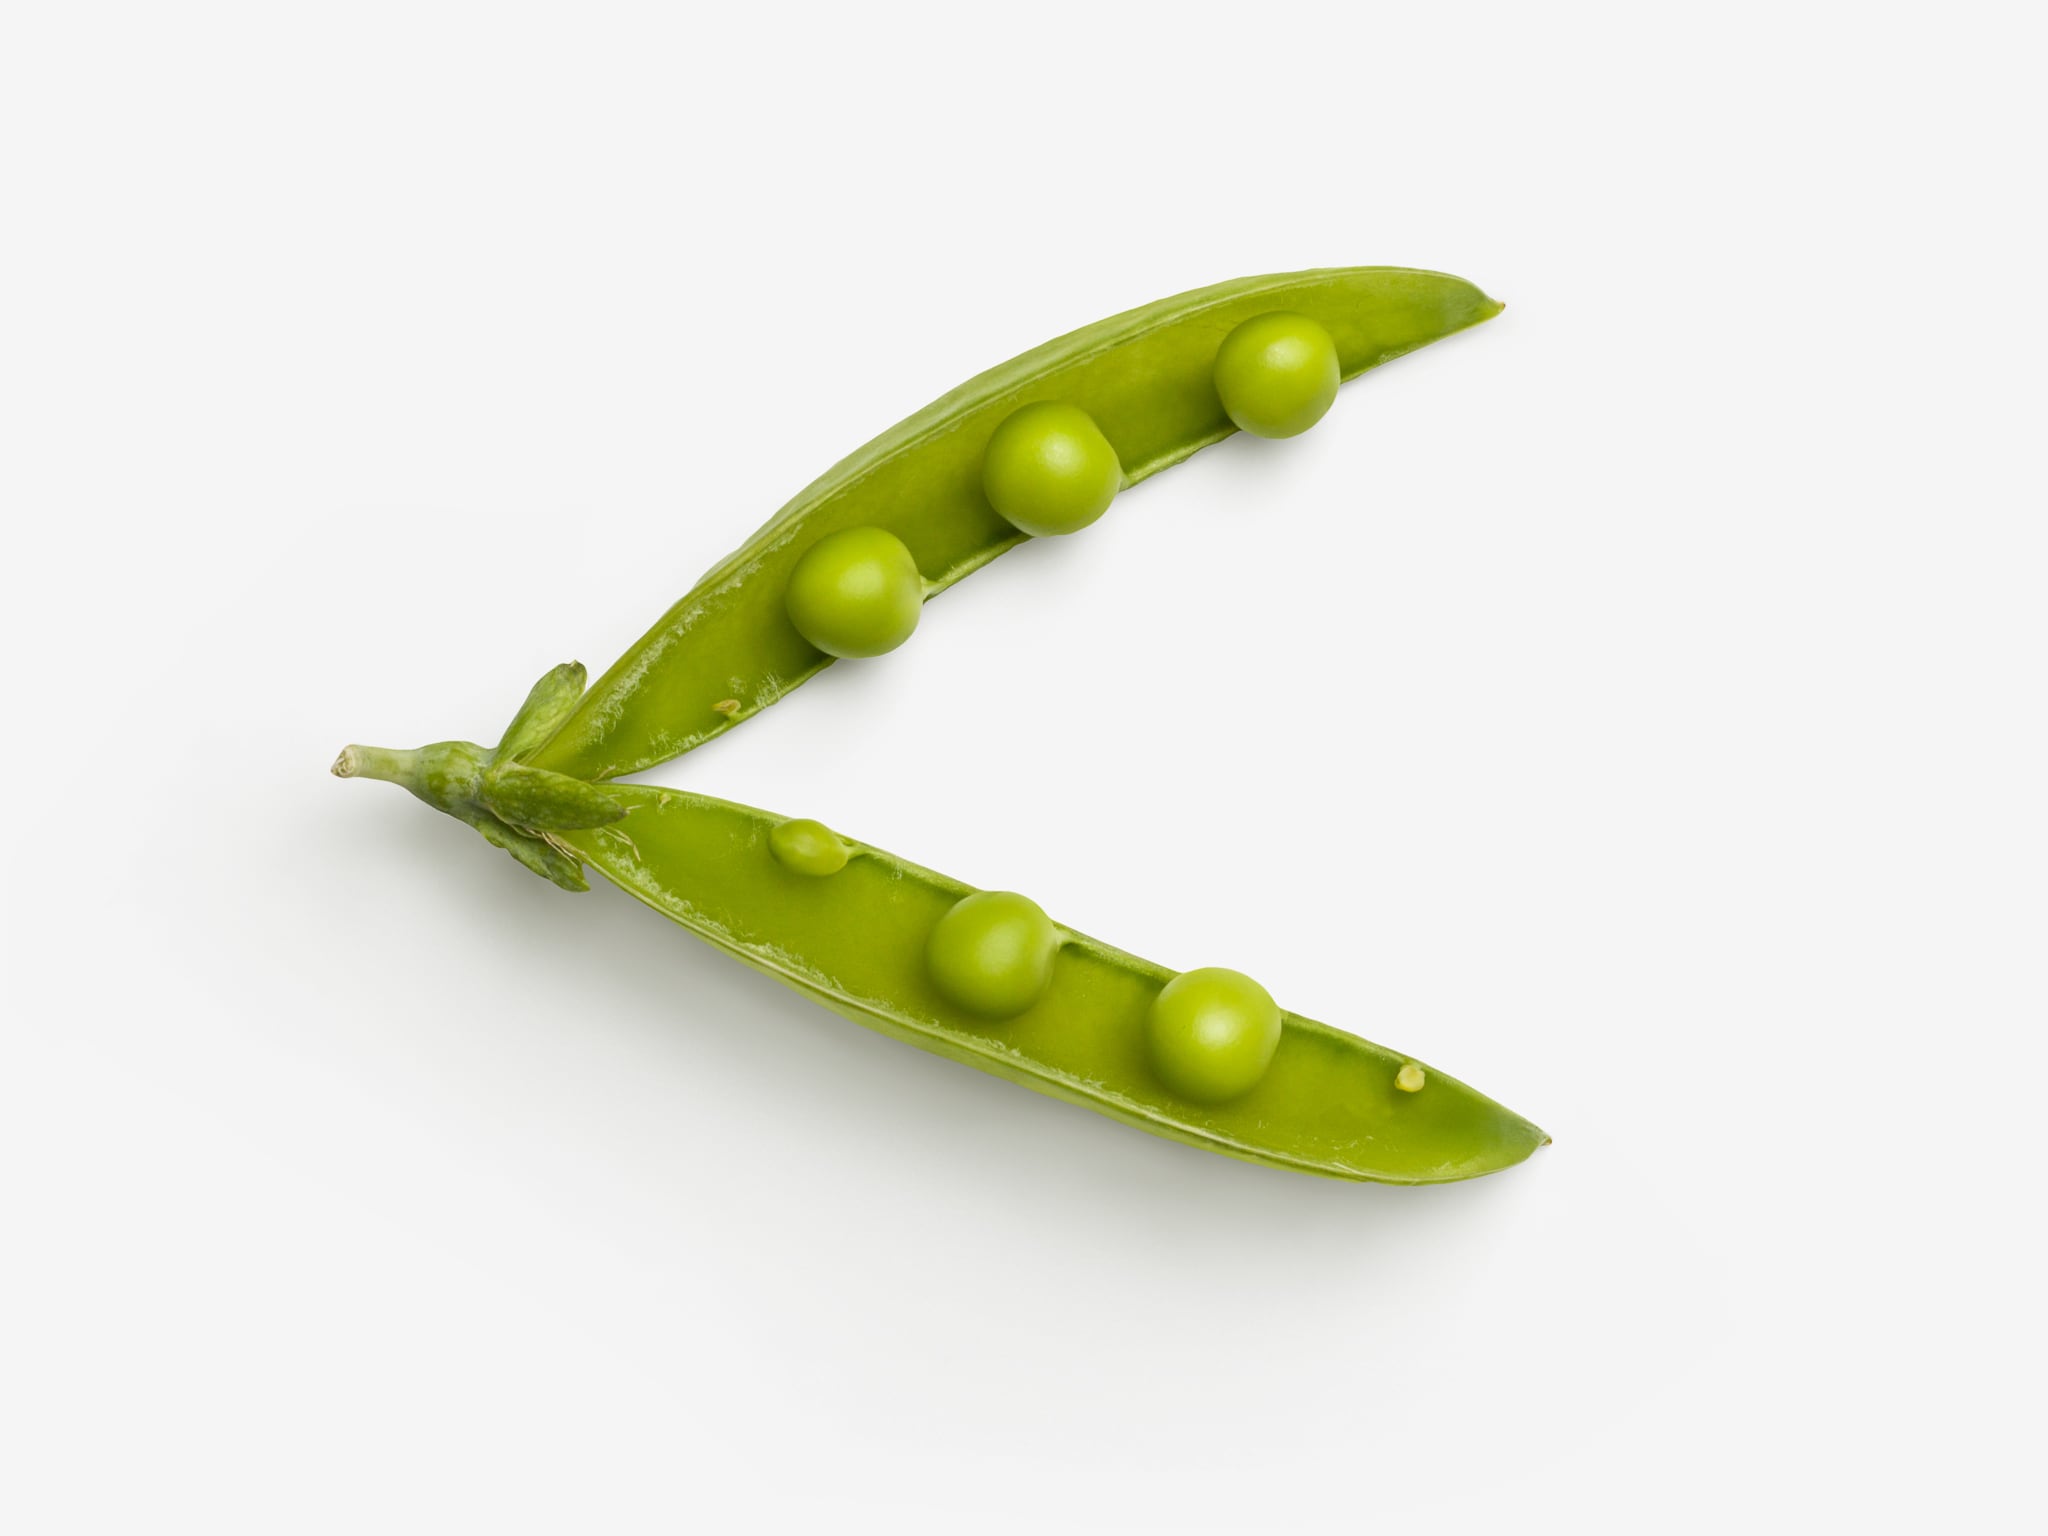 Green Pea PSD image with transparent background